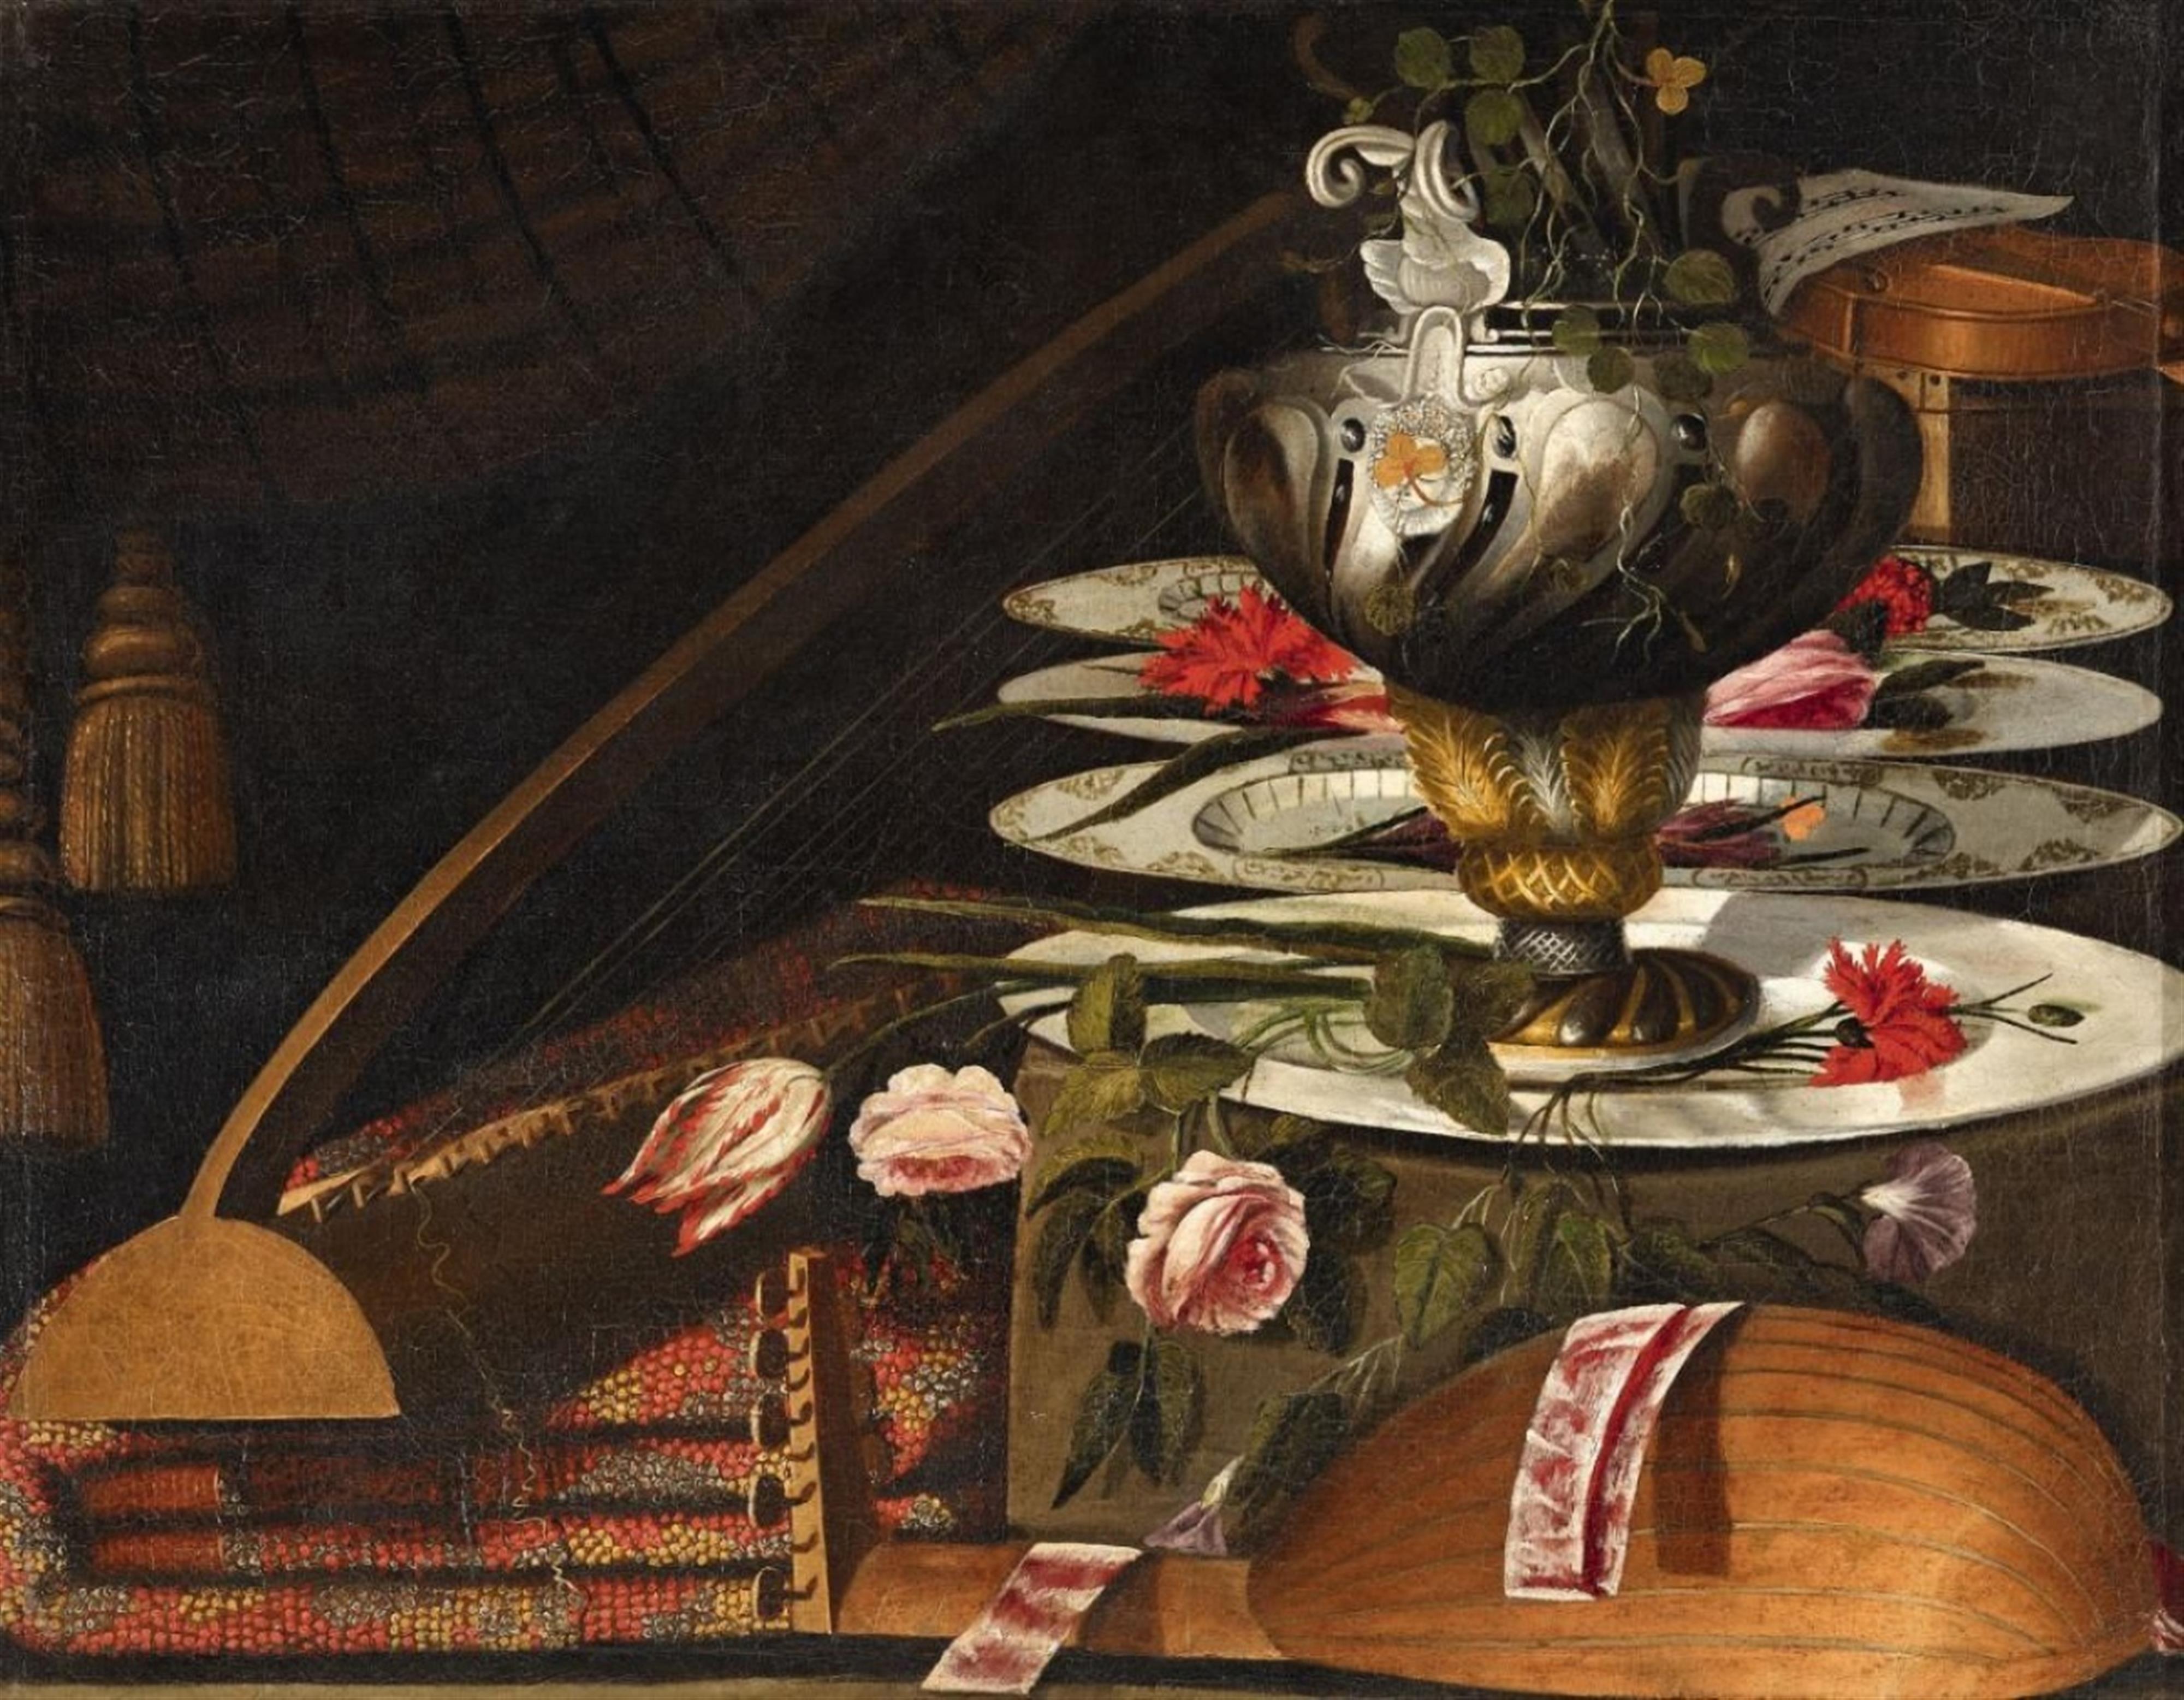 Italian School
Lombardian School, 17th century - Still Life with Musical Instruments, a Vase, Carpet, and Flowers - image-1